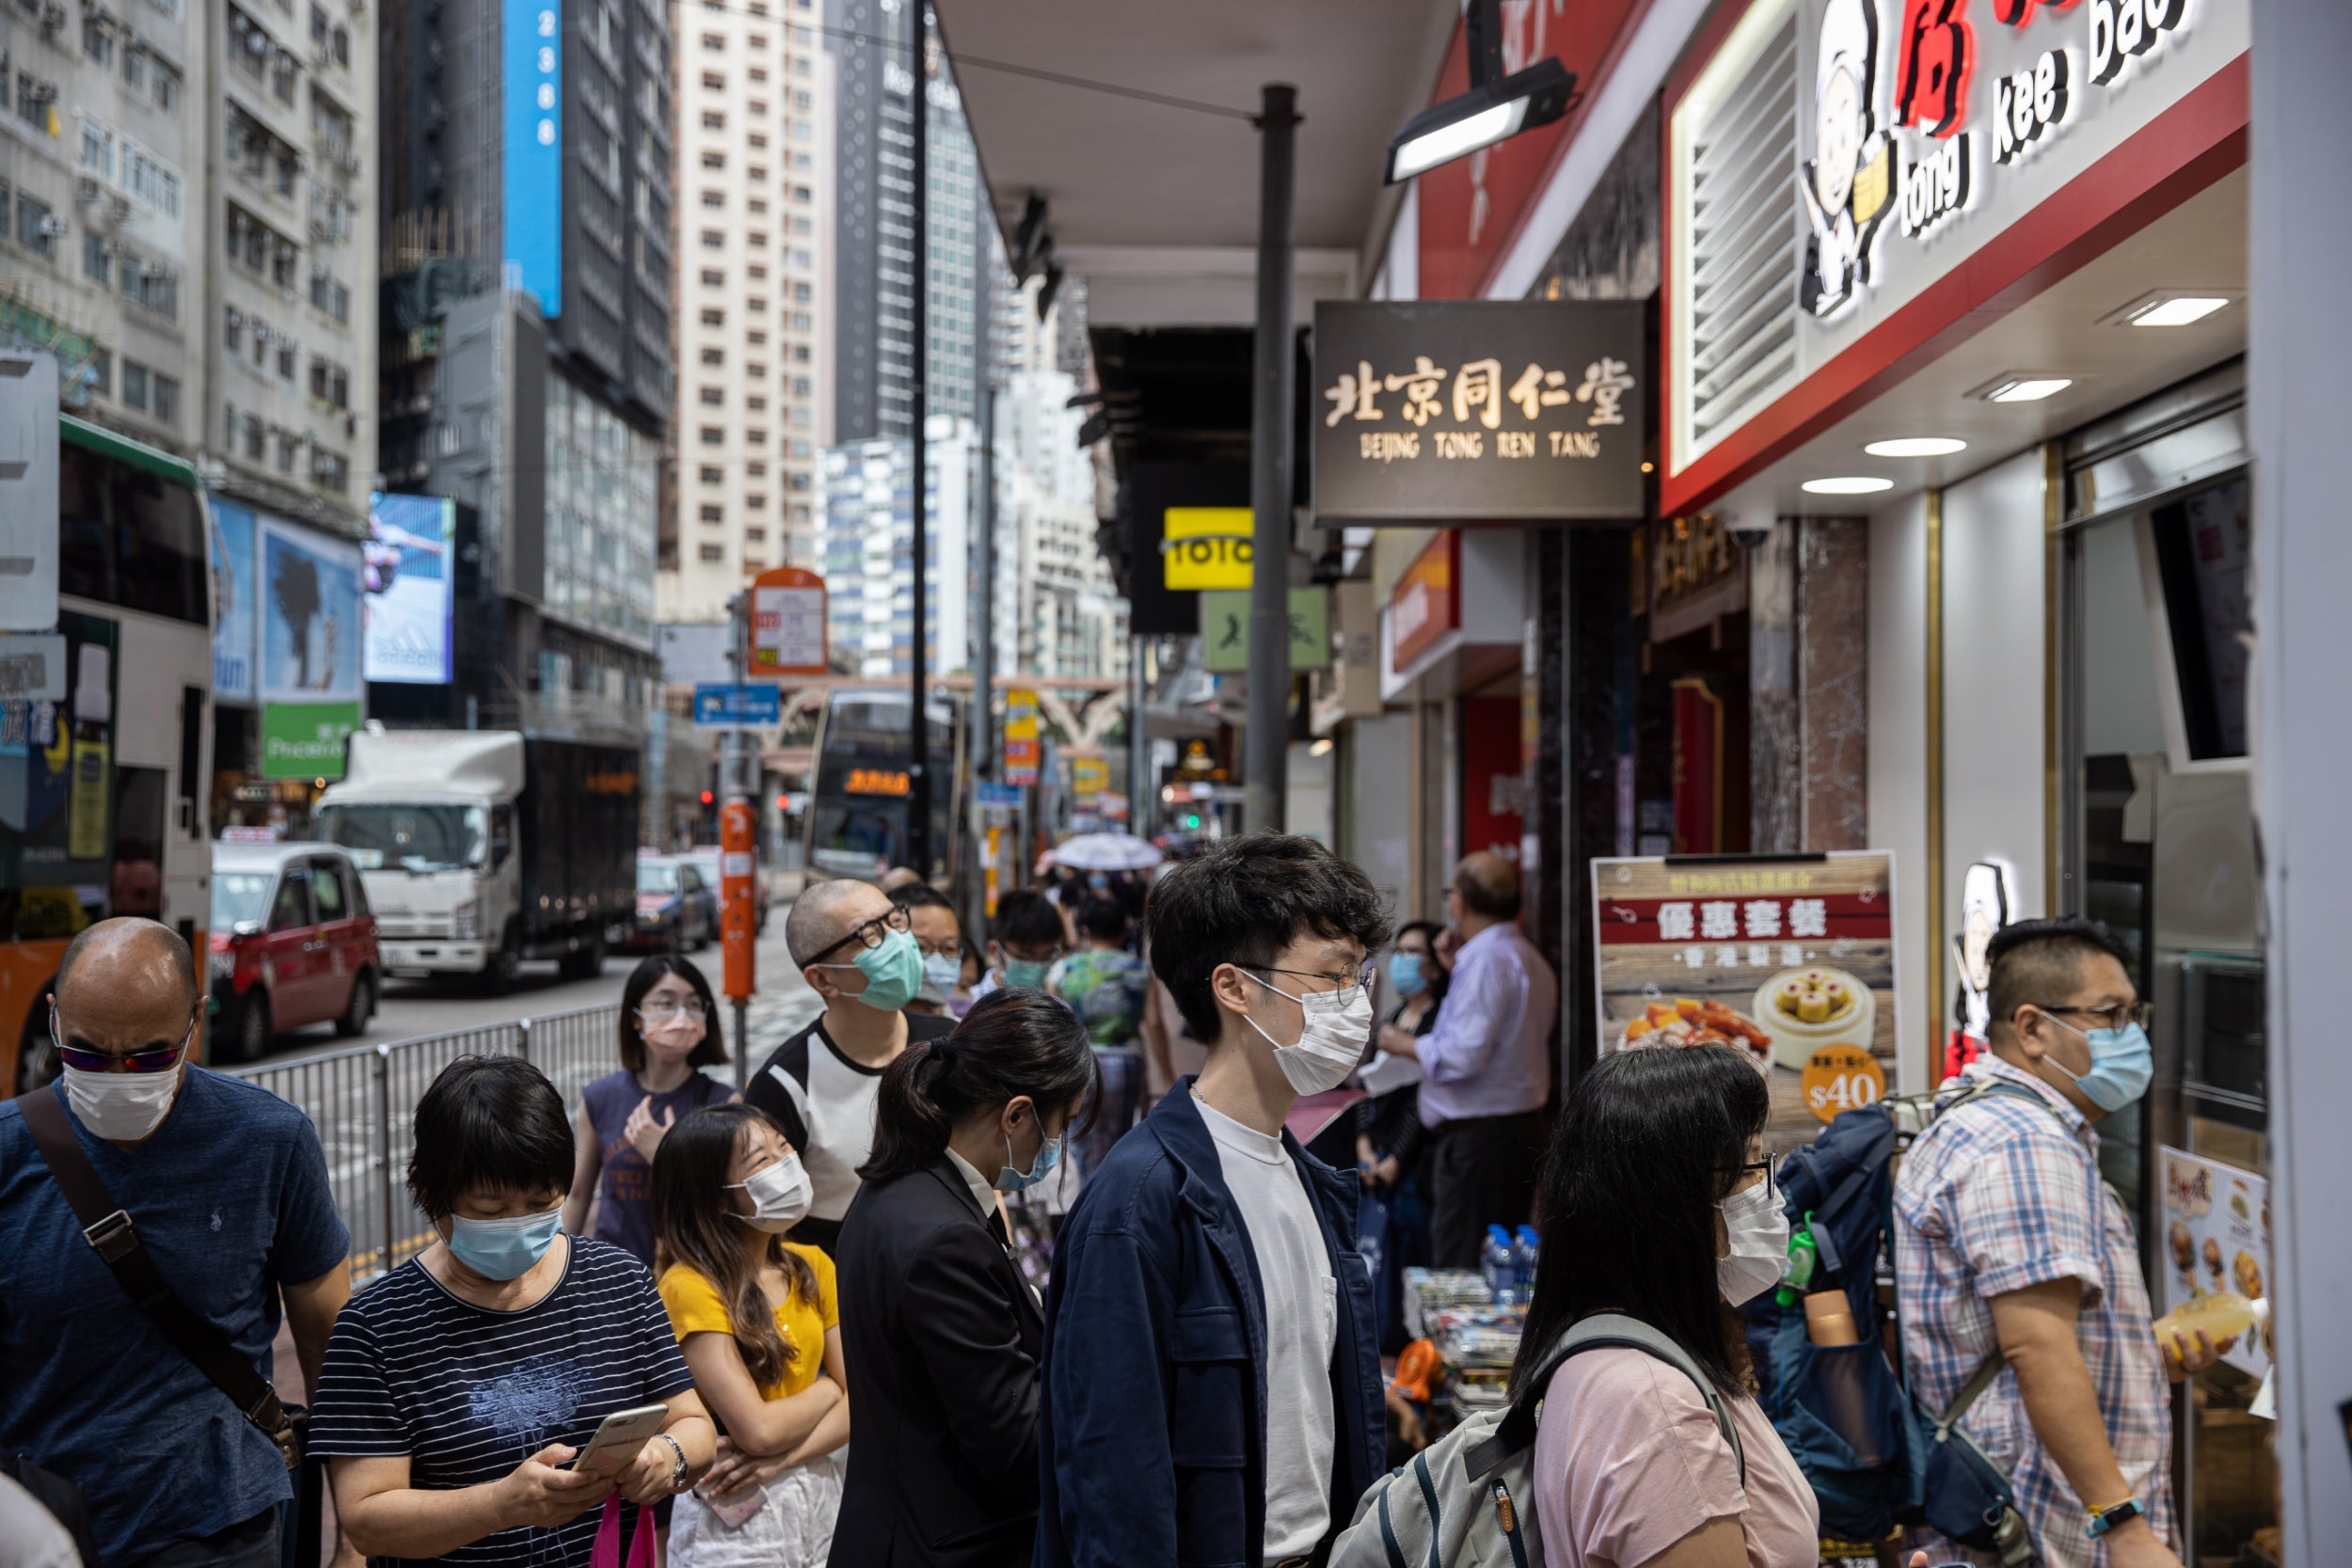 Restaurants in Hong Kong now only allowed to offer takeaway